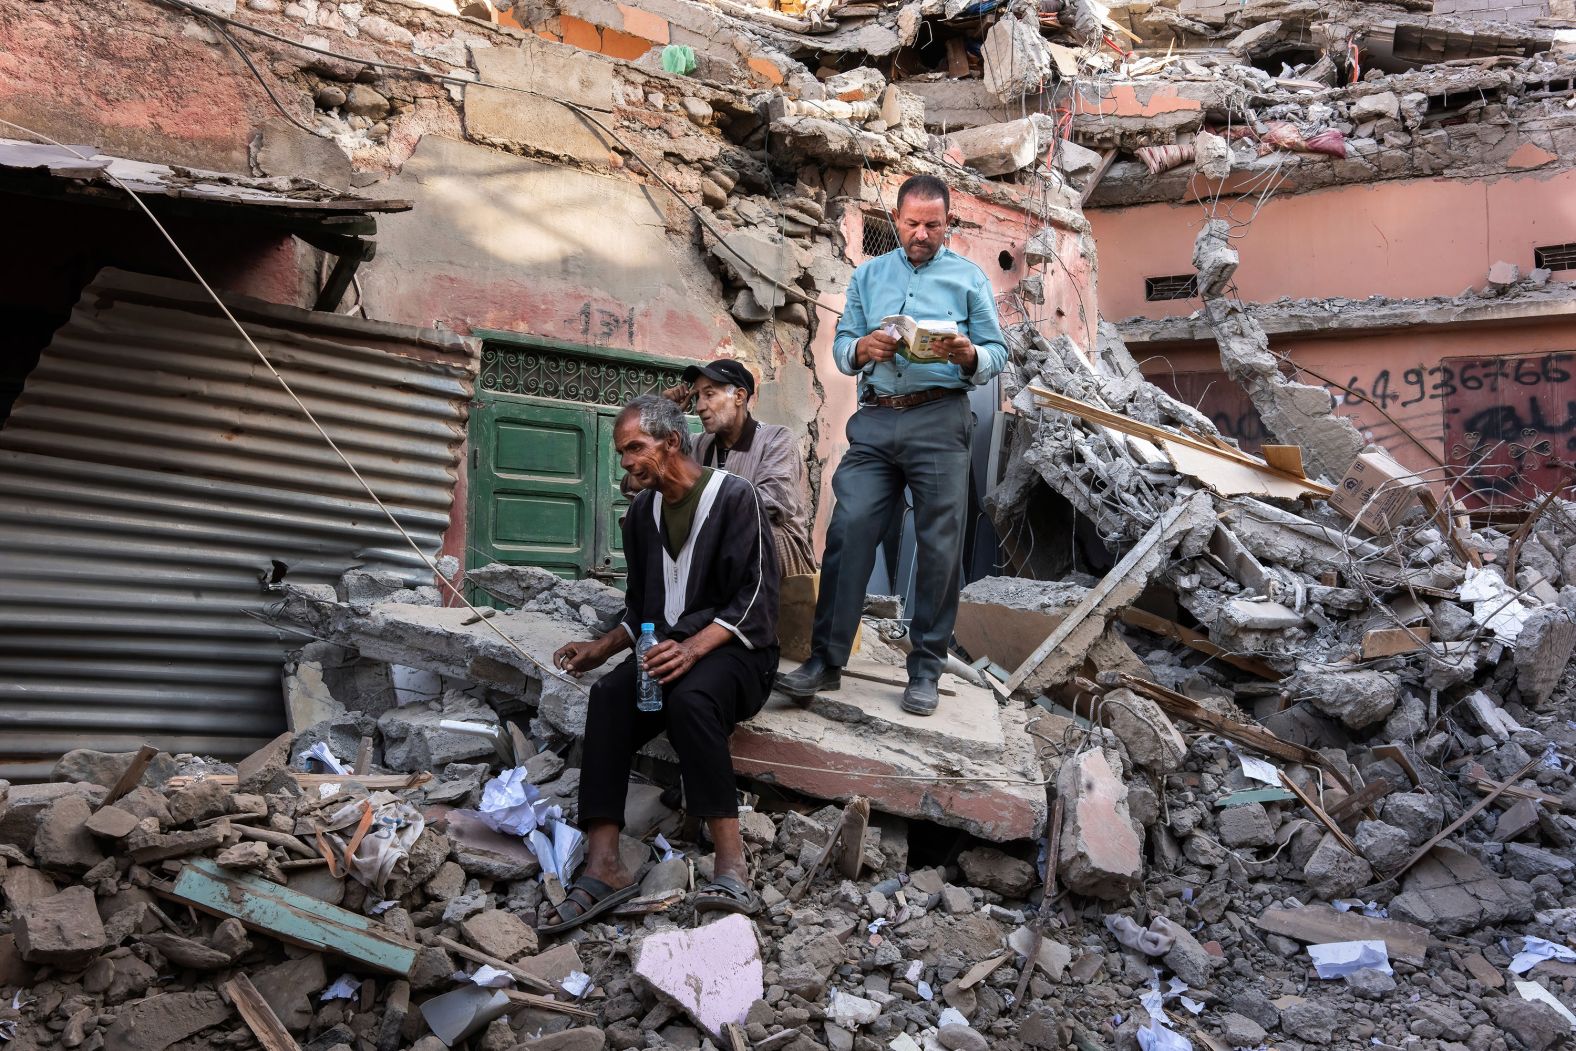 A man reads a book on top of a collapsed house in Amizmiz.